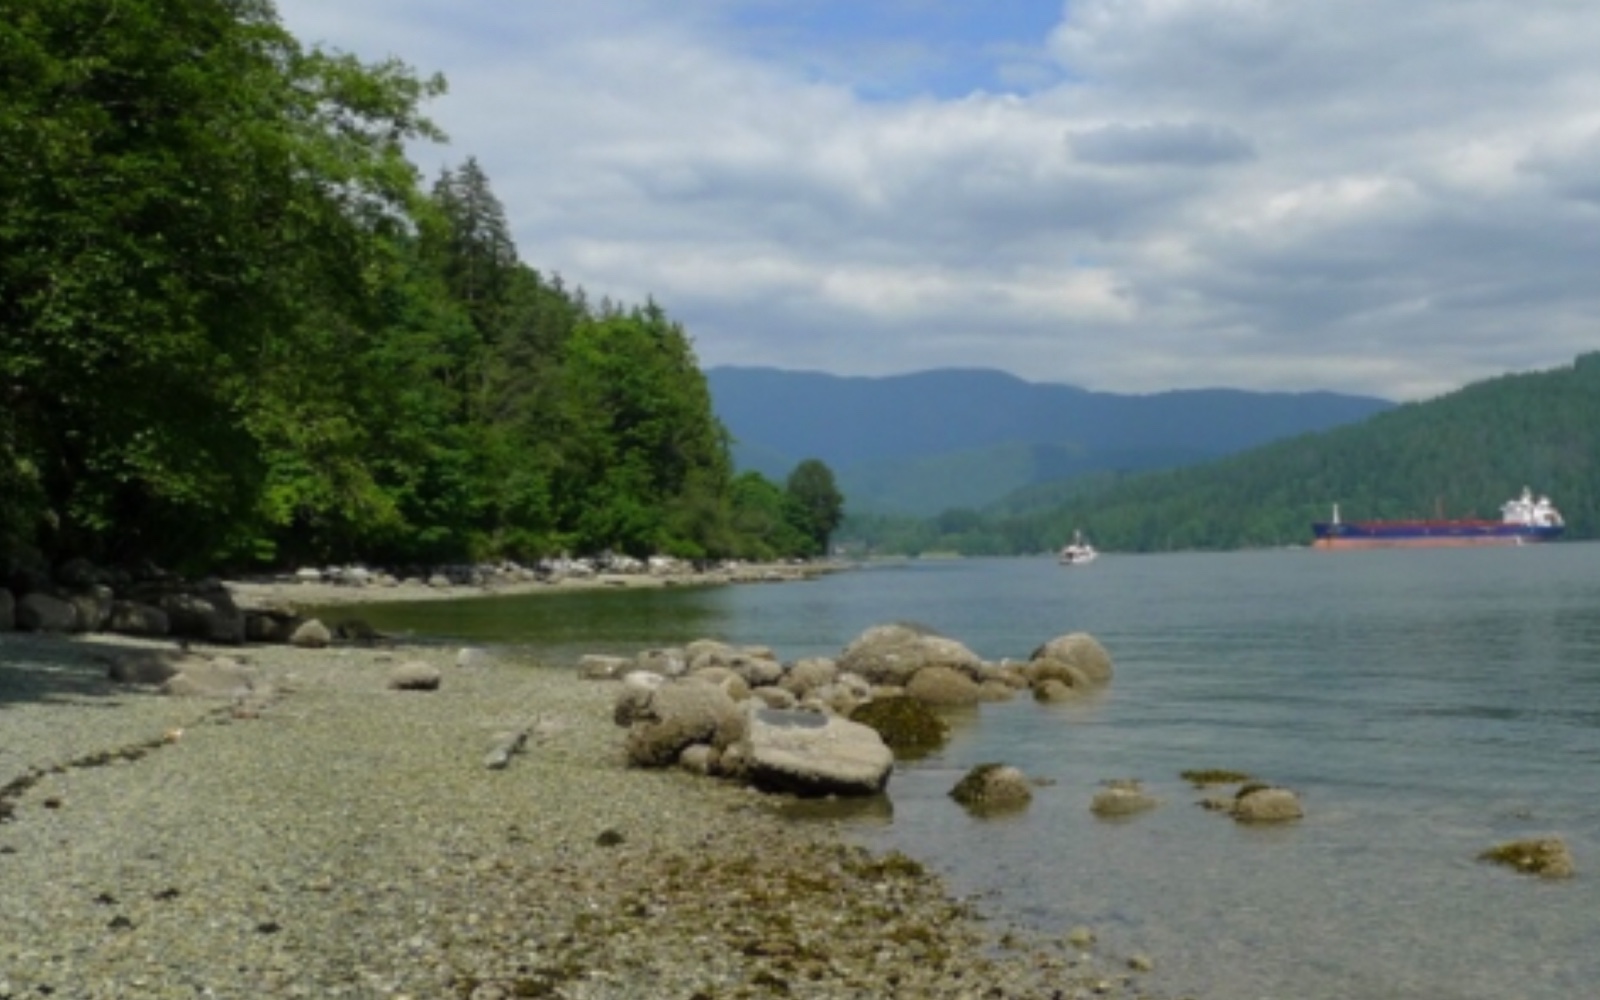 The view of Deep Cove from Cates Park